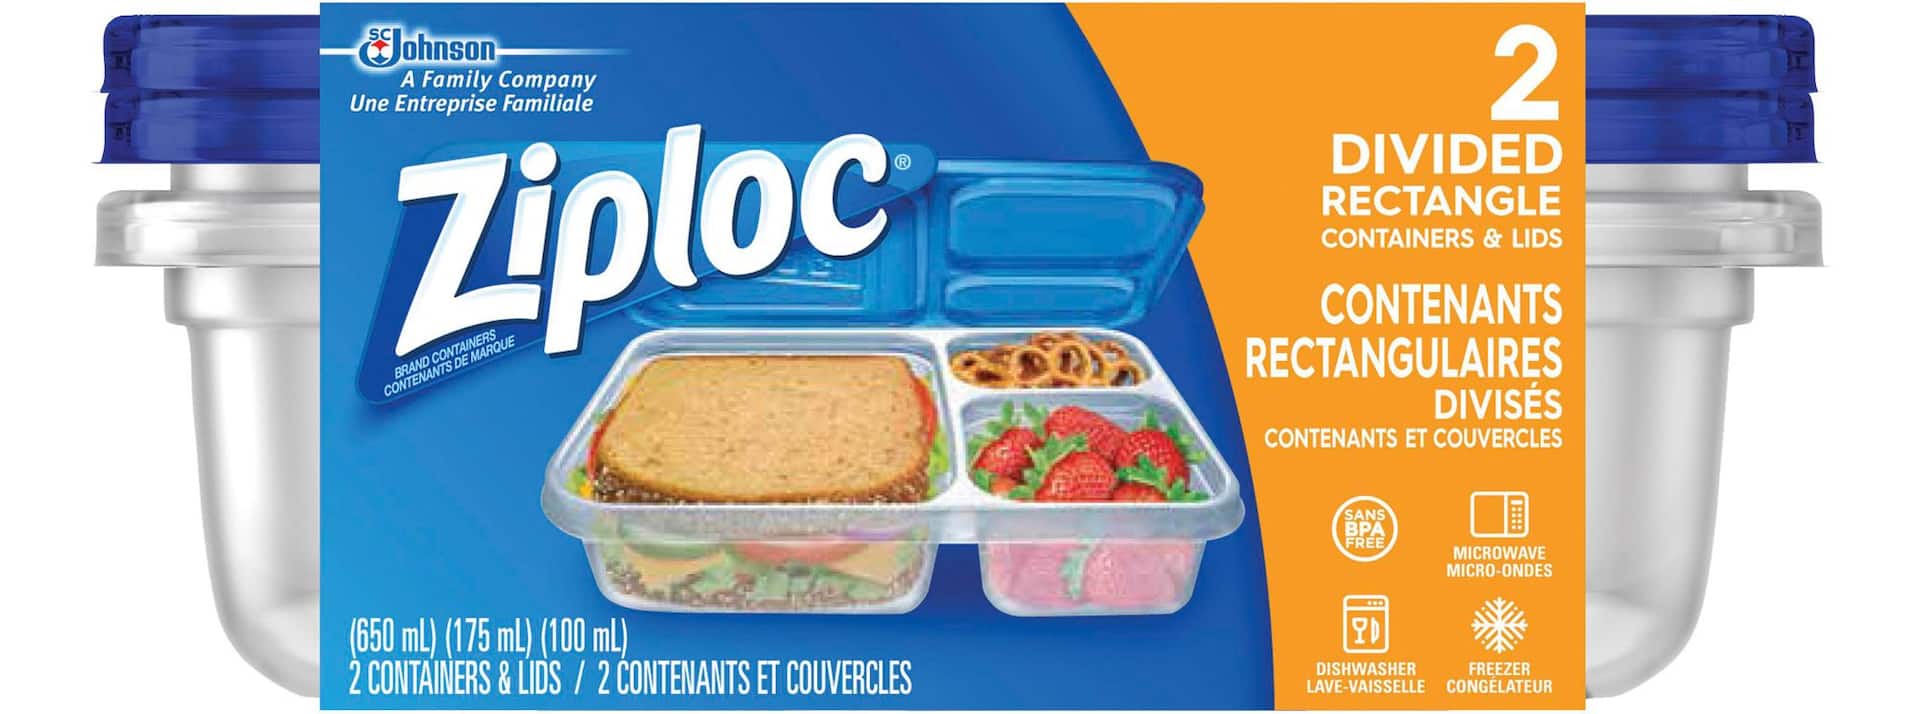 Ziploc Food Containers, Divided Rectangle